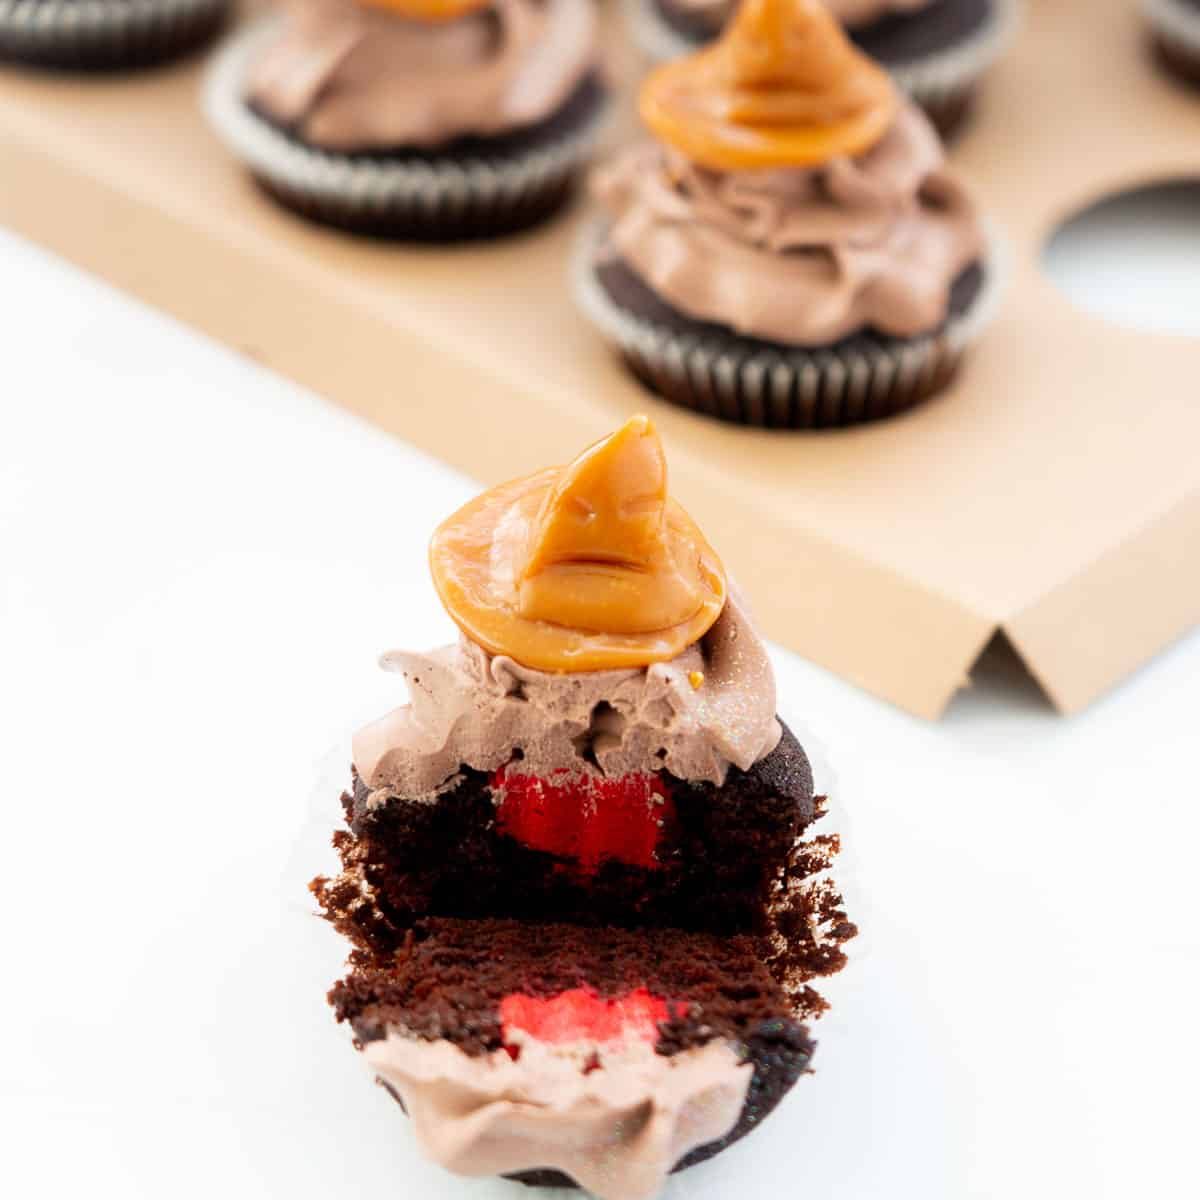 A sorting hat cupcake cut in half to reveal its hidden red butter cream filling.